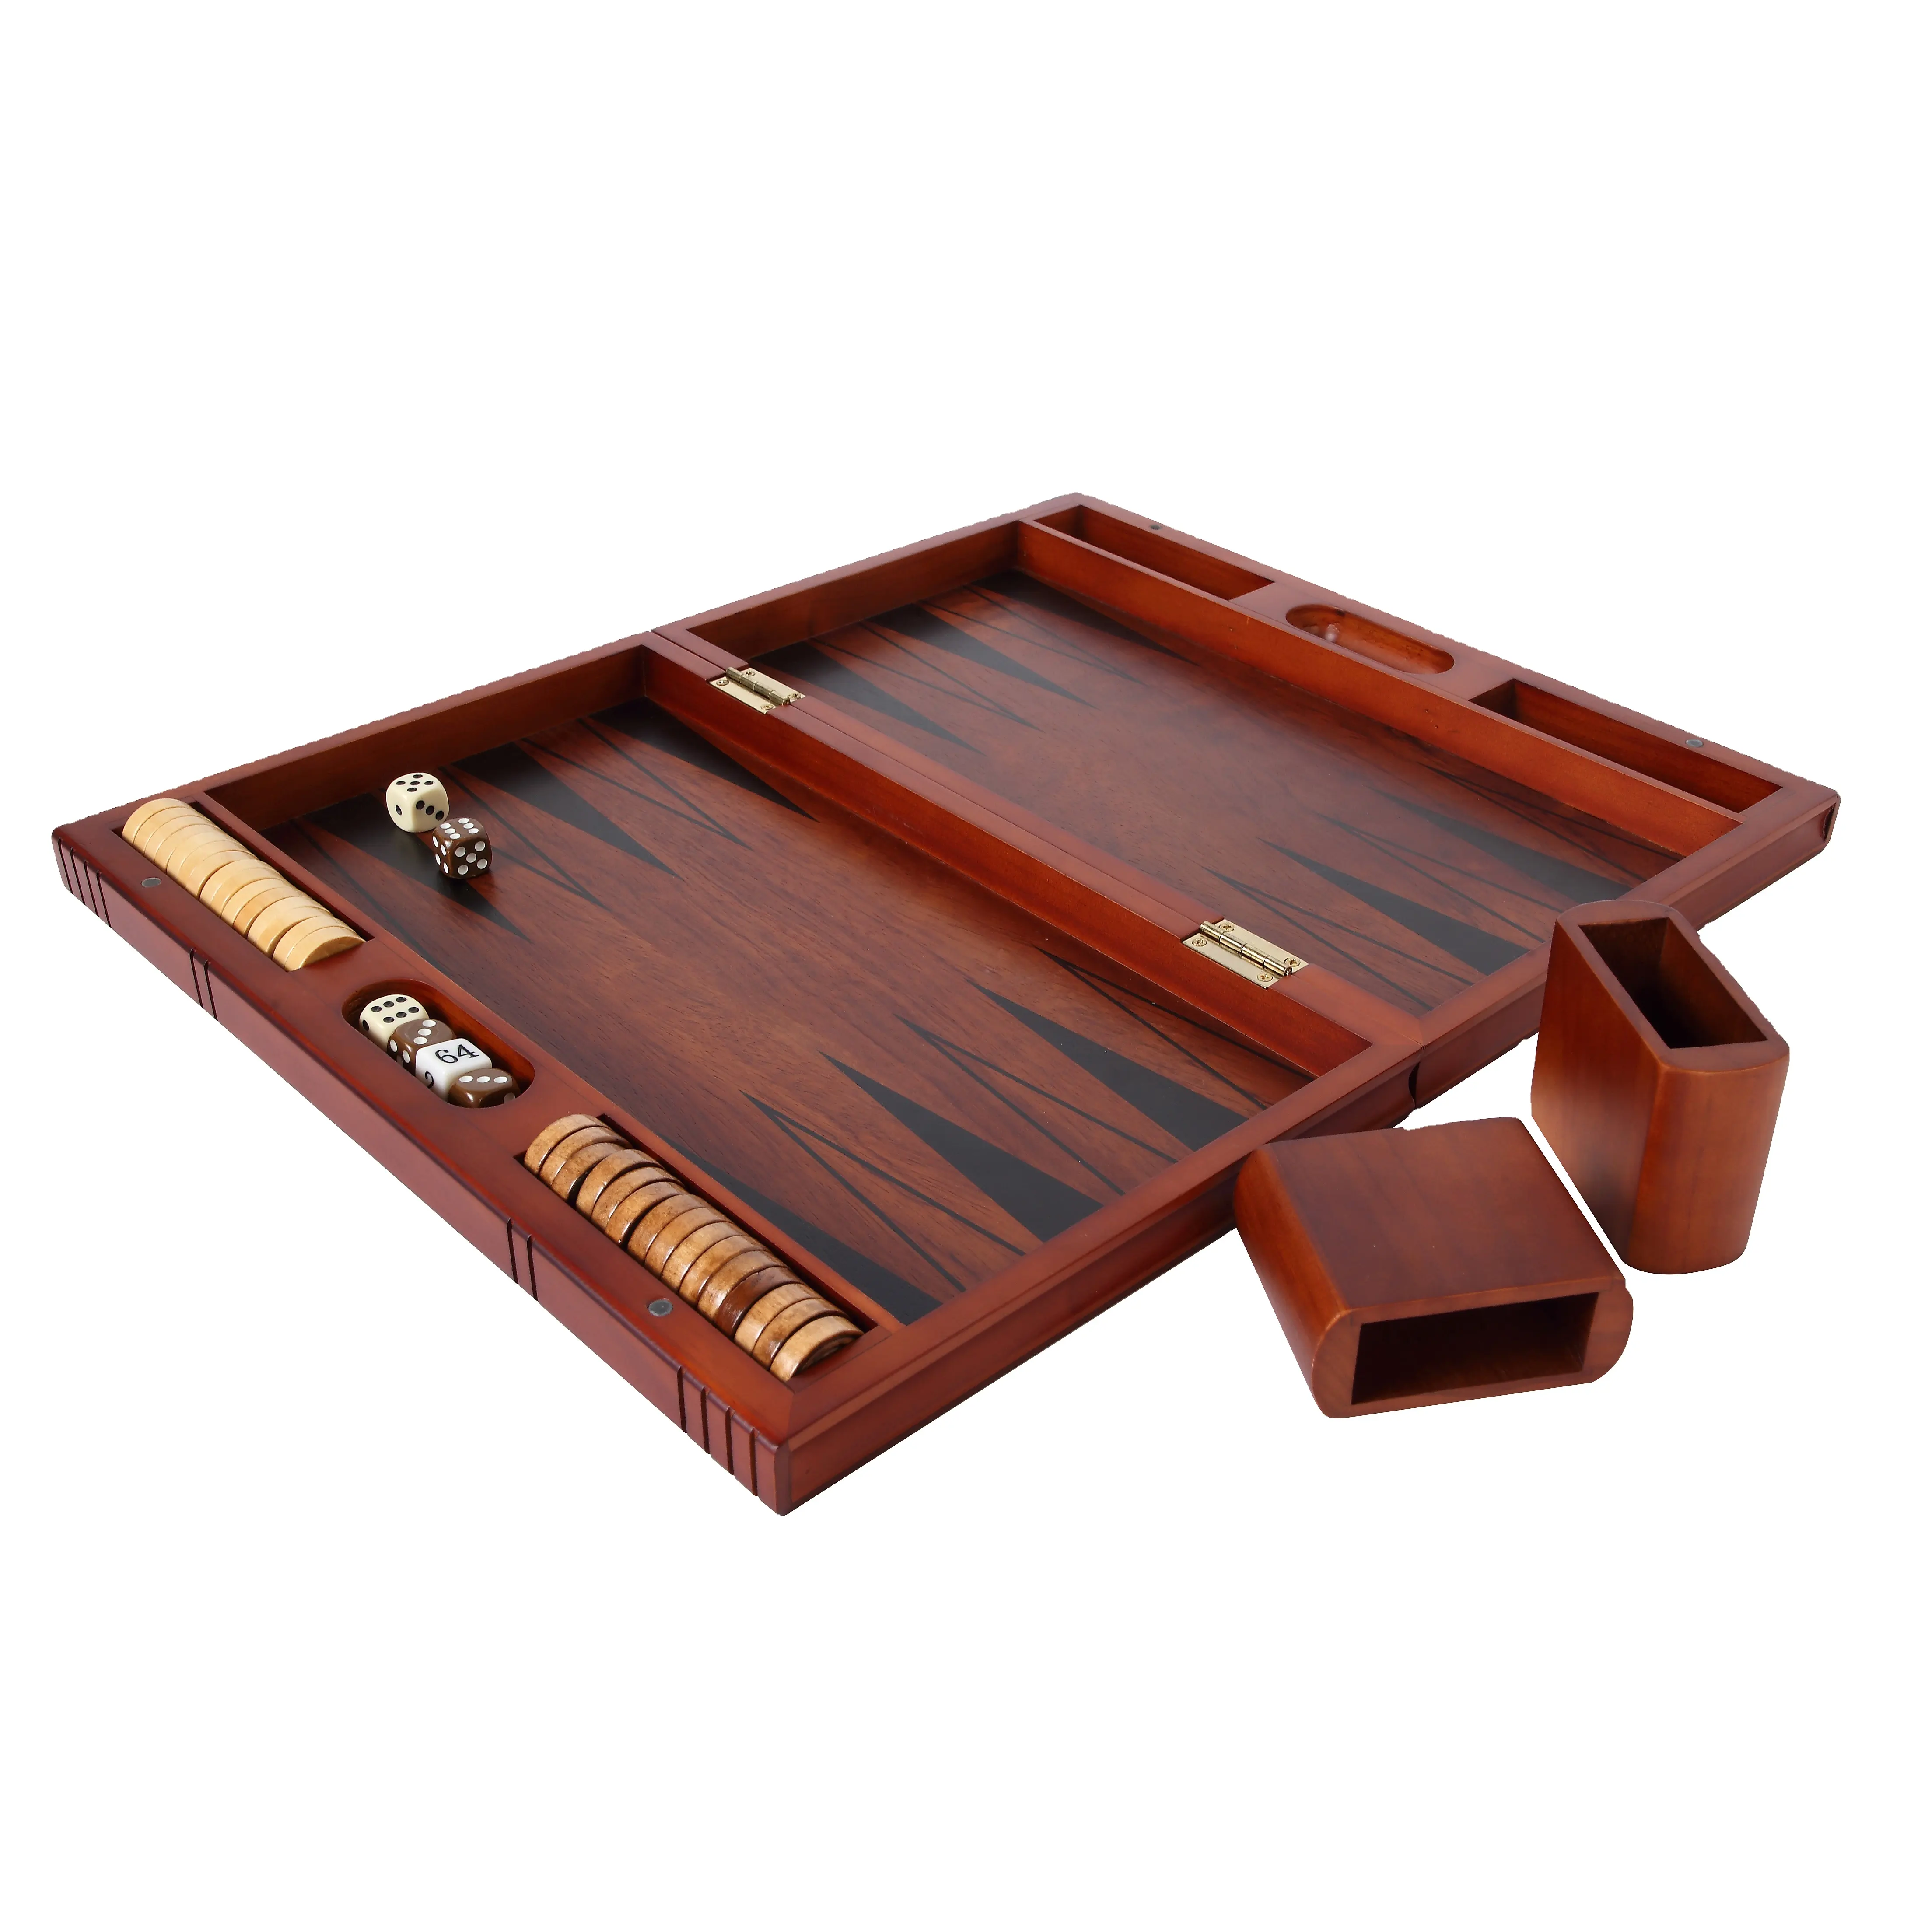 High-end wooden chess set, Checkers, high quality wooden backgammon board game set